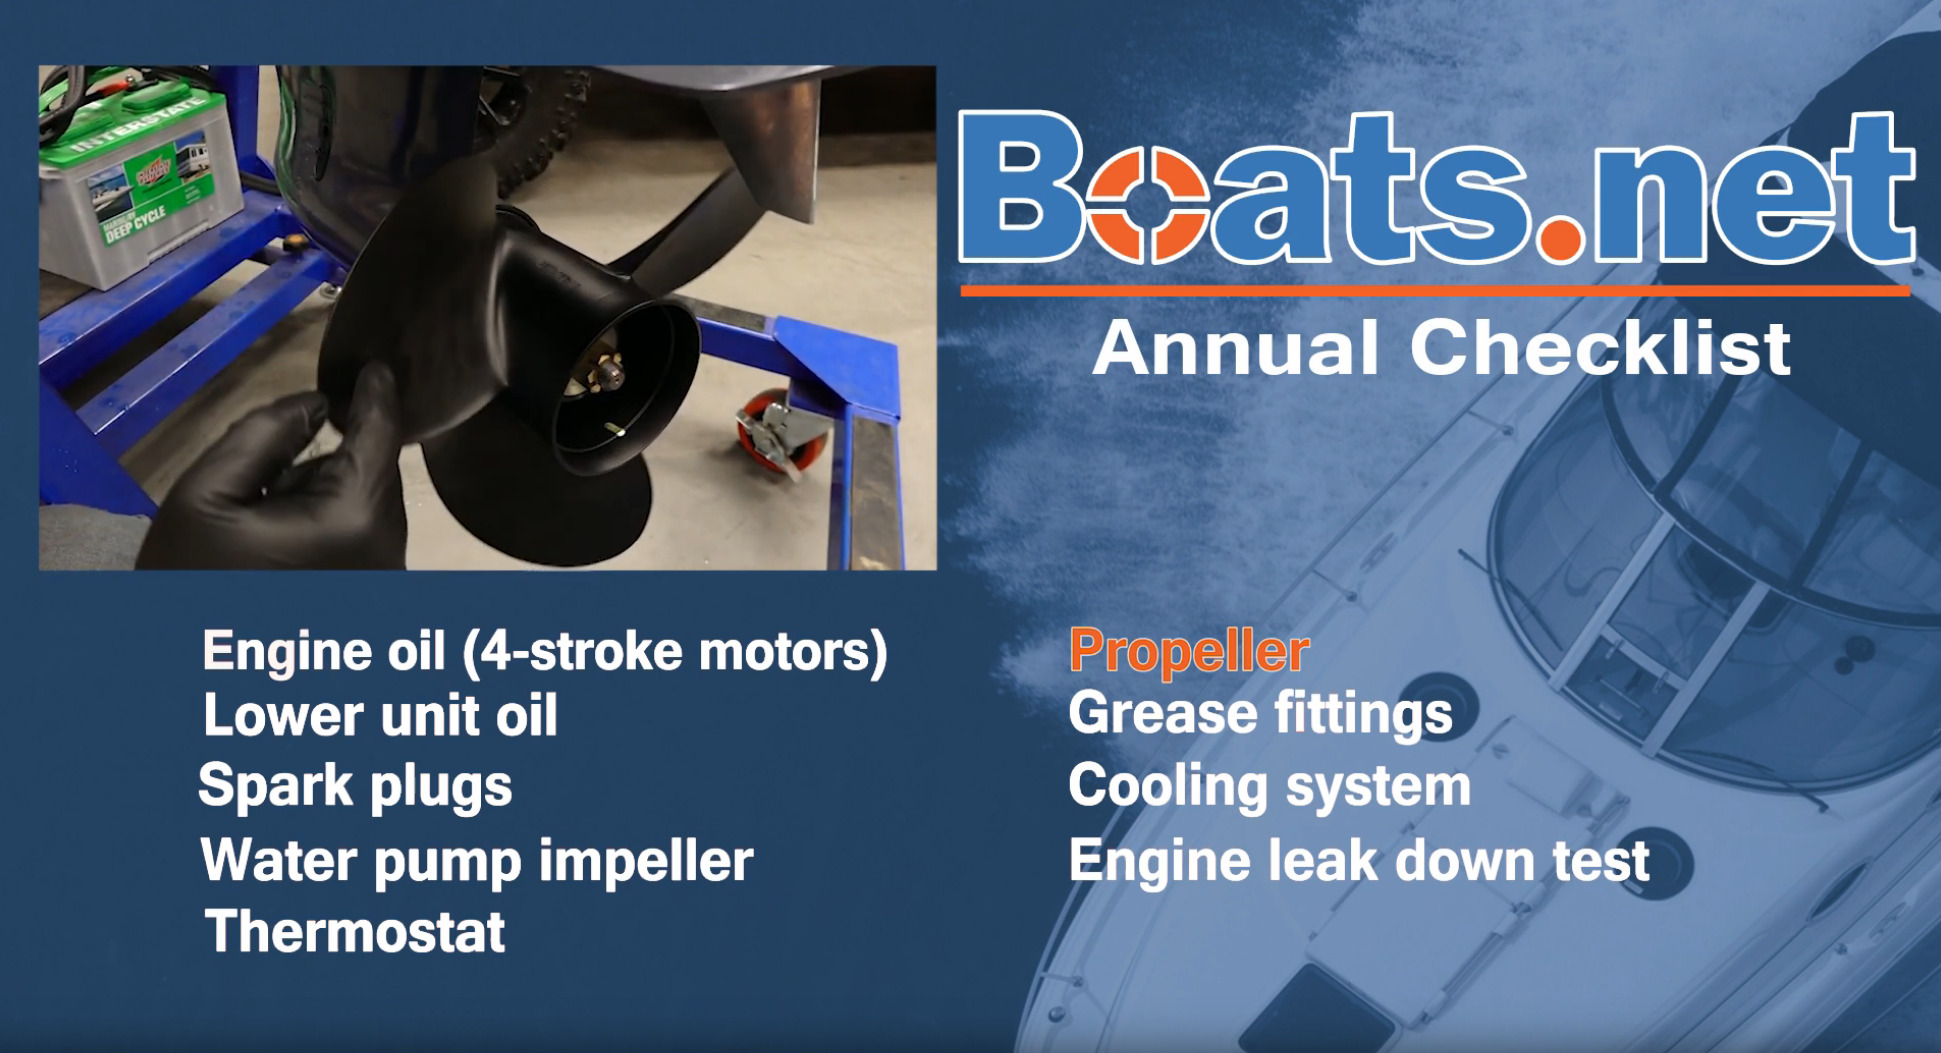 Outboard annual maintenance propeller